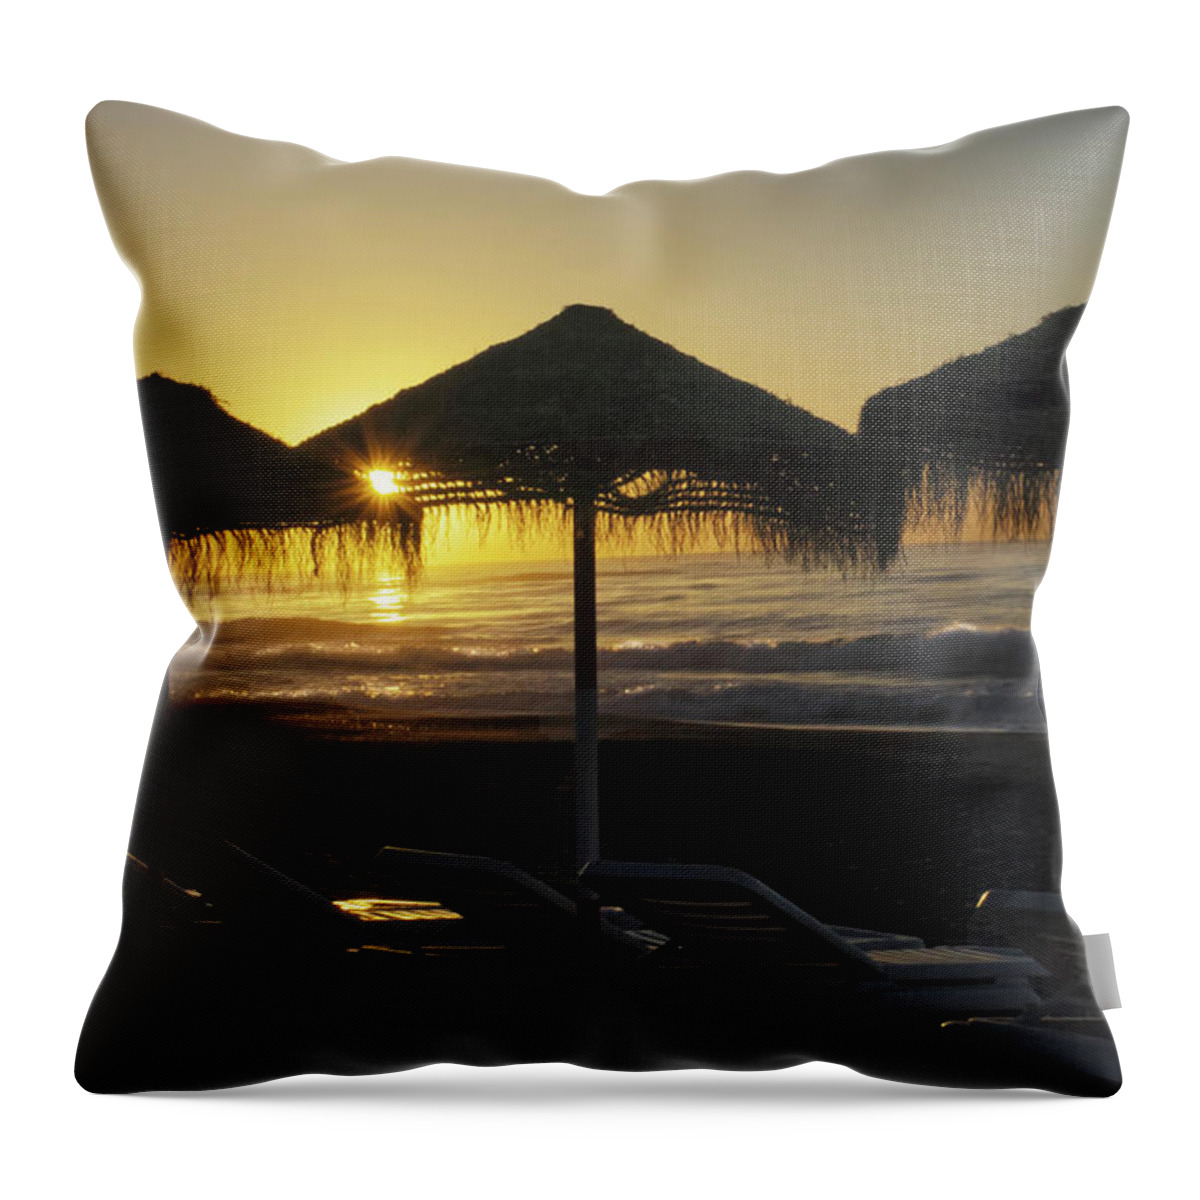 Torremolinos Throw Pillow featuring the photograph Wish I was here by Pics By Tony